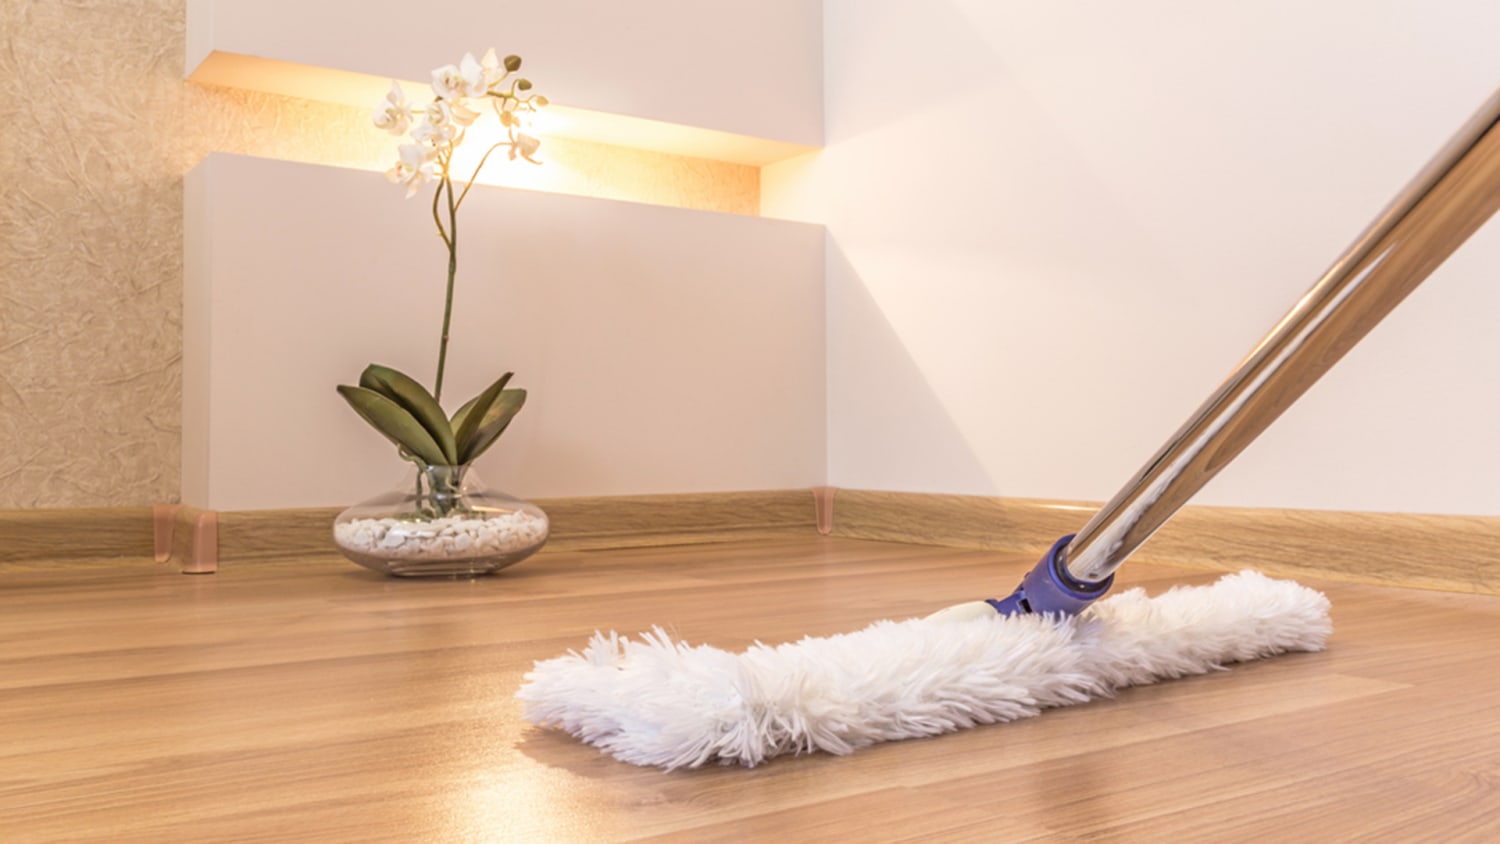 How To Clean Hardwood Floors The Right Way, Cleaning Heavily Soiled Hardwood Floors